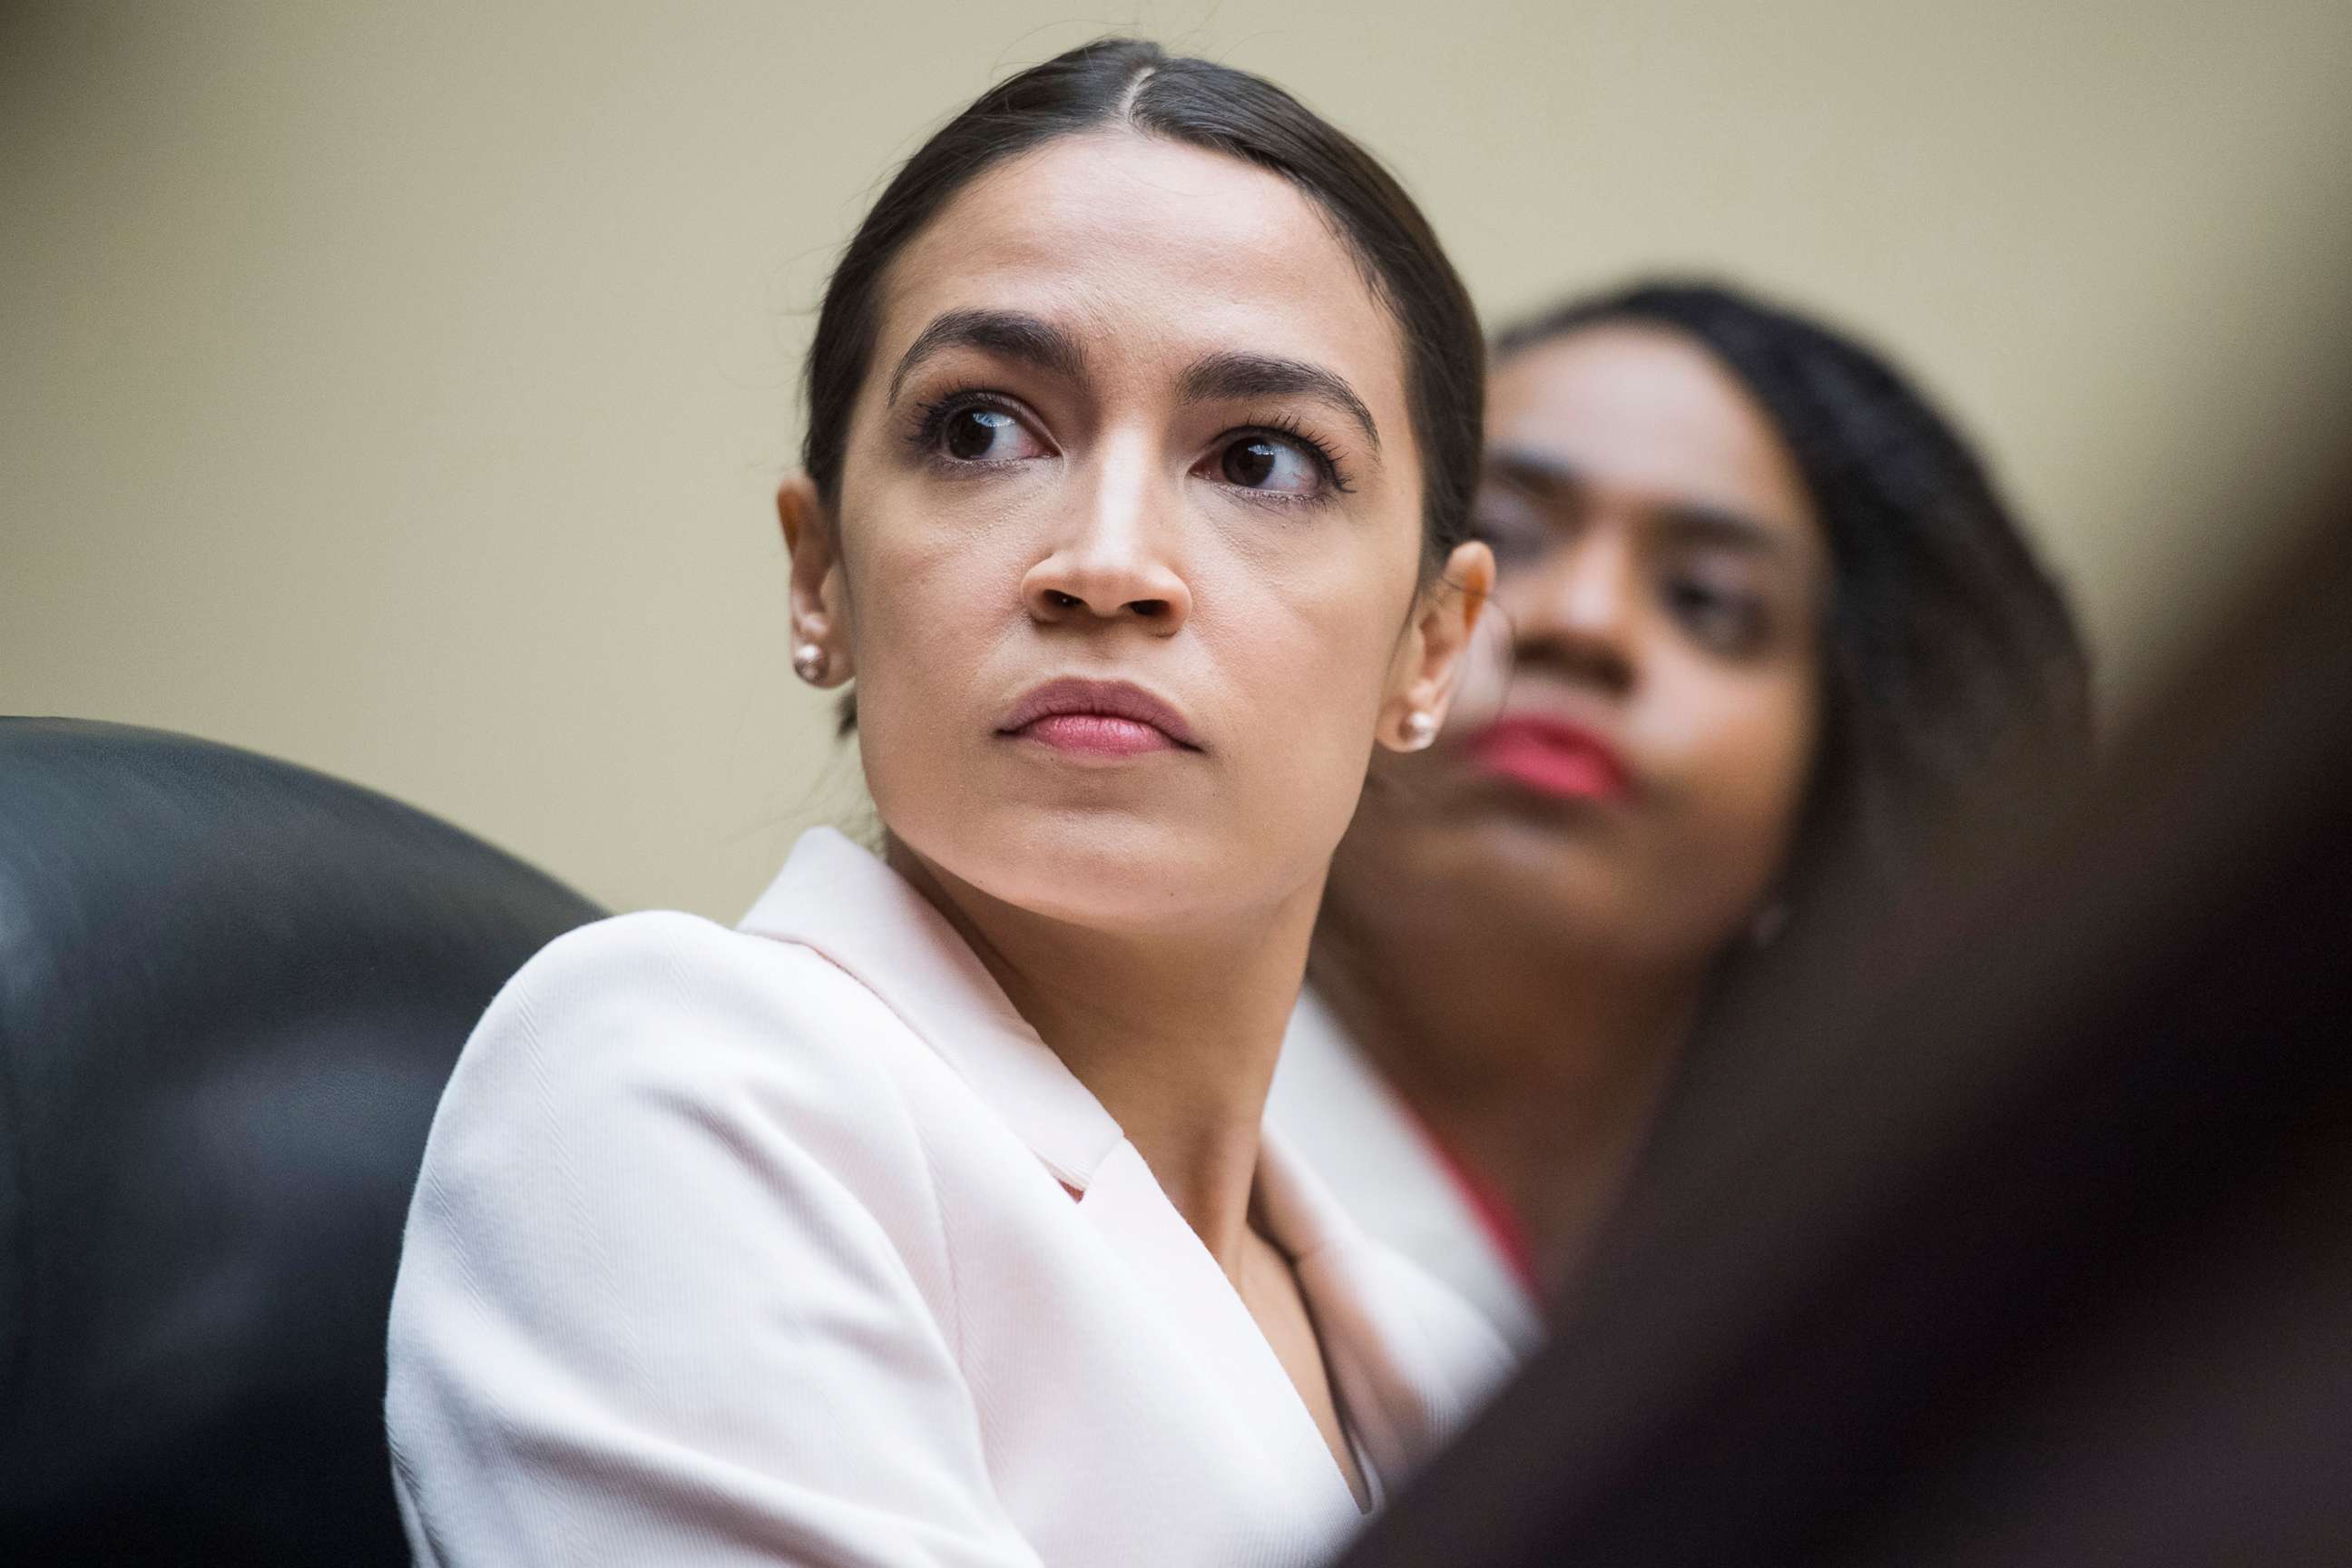 PHOTO: Reps. Alexandria Ocasio-Cortez and Ayanna Pressley attend a House Oversight and Reform Committee markup on Capitol Hill, June 12, 2019. 